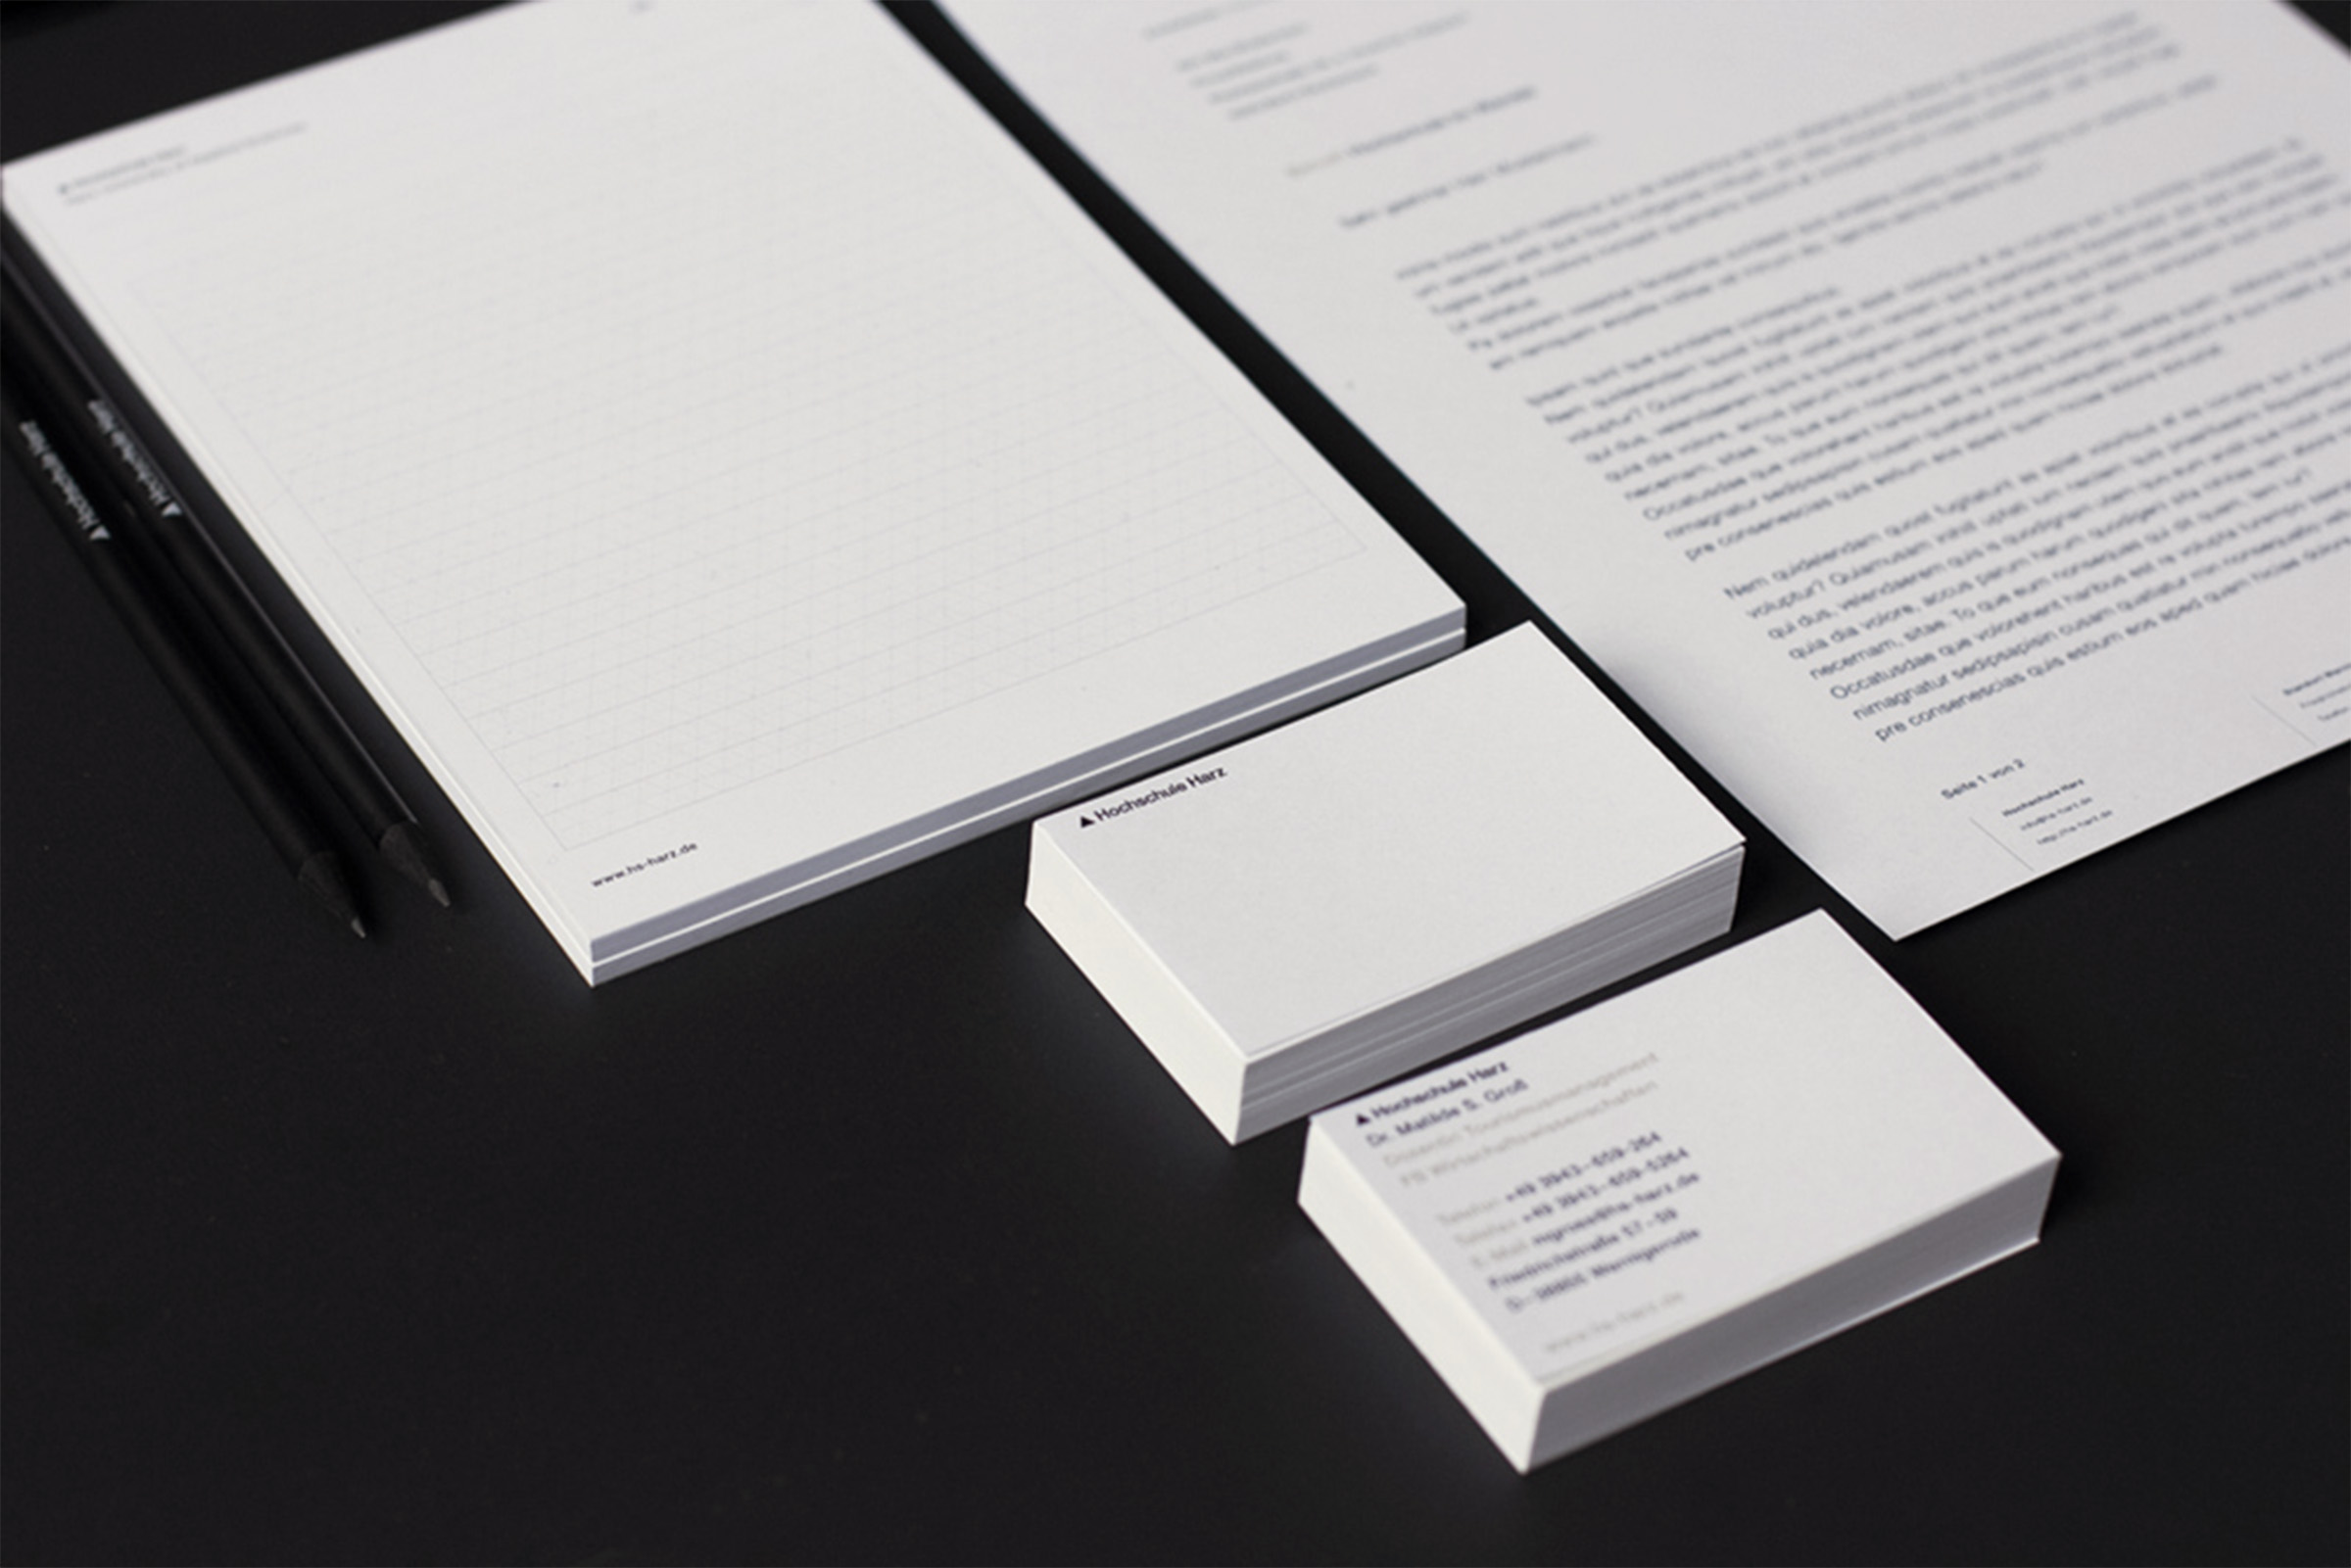 A business letter, business cards, a branded notepad and branded pencils on a black background.